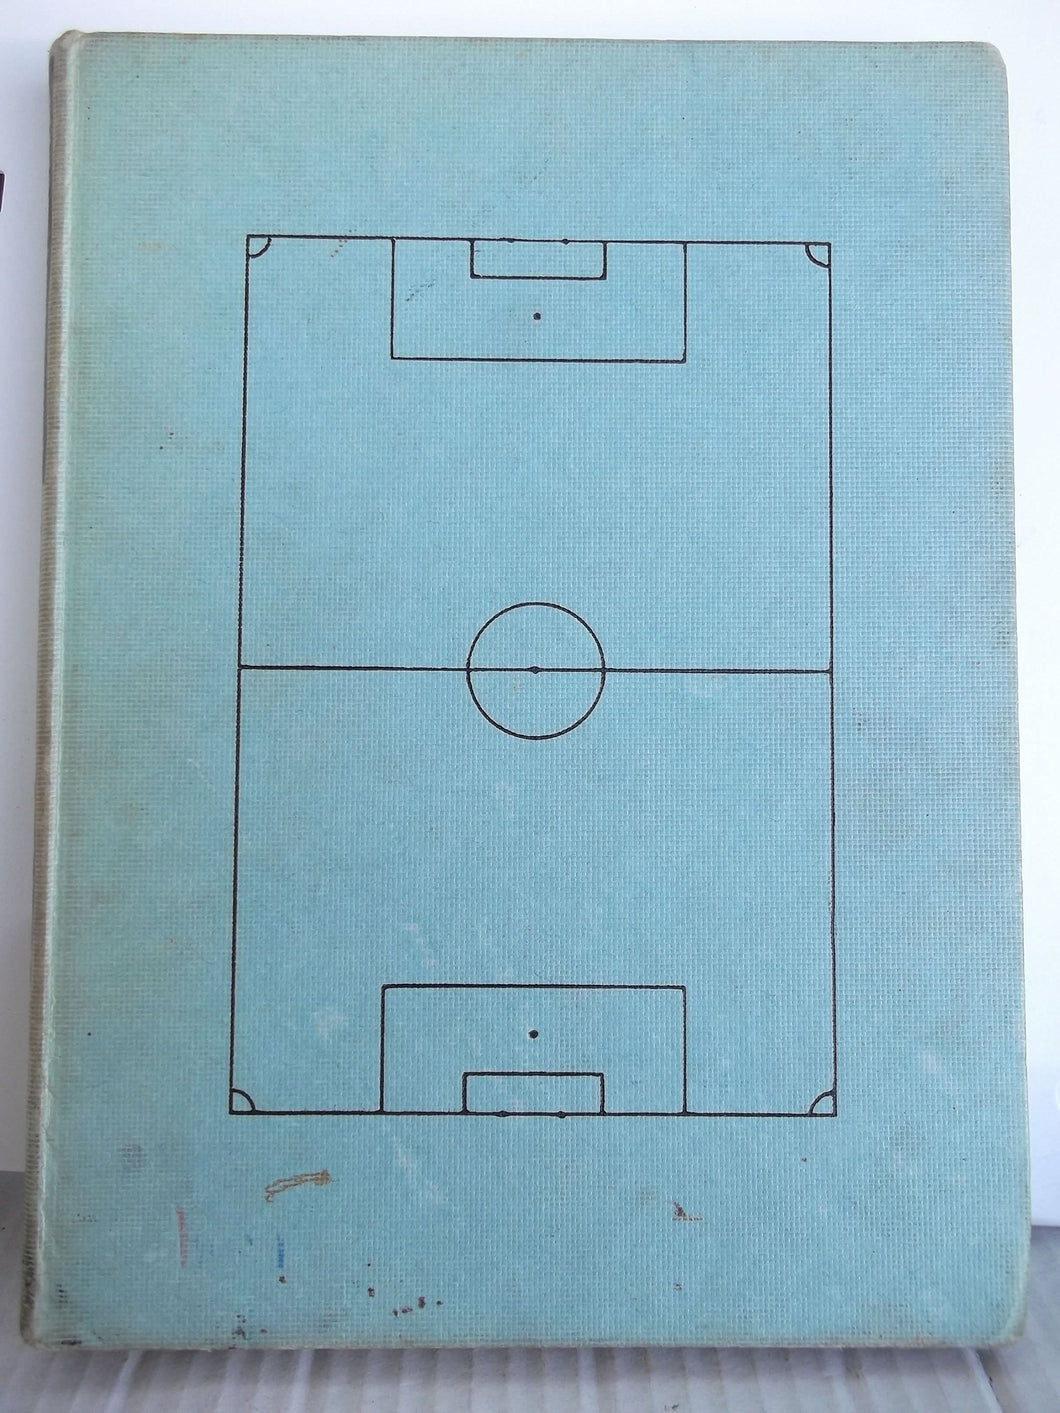 Billy Wright's Book of Soccer No.4 [Hardcover] Wright, Billy